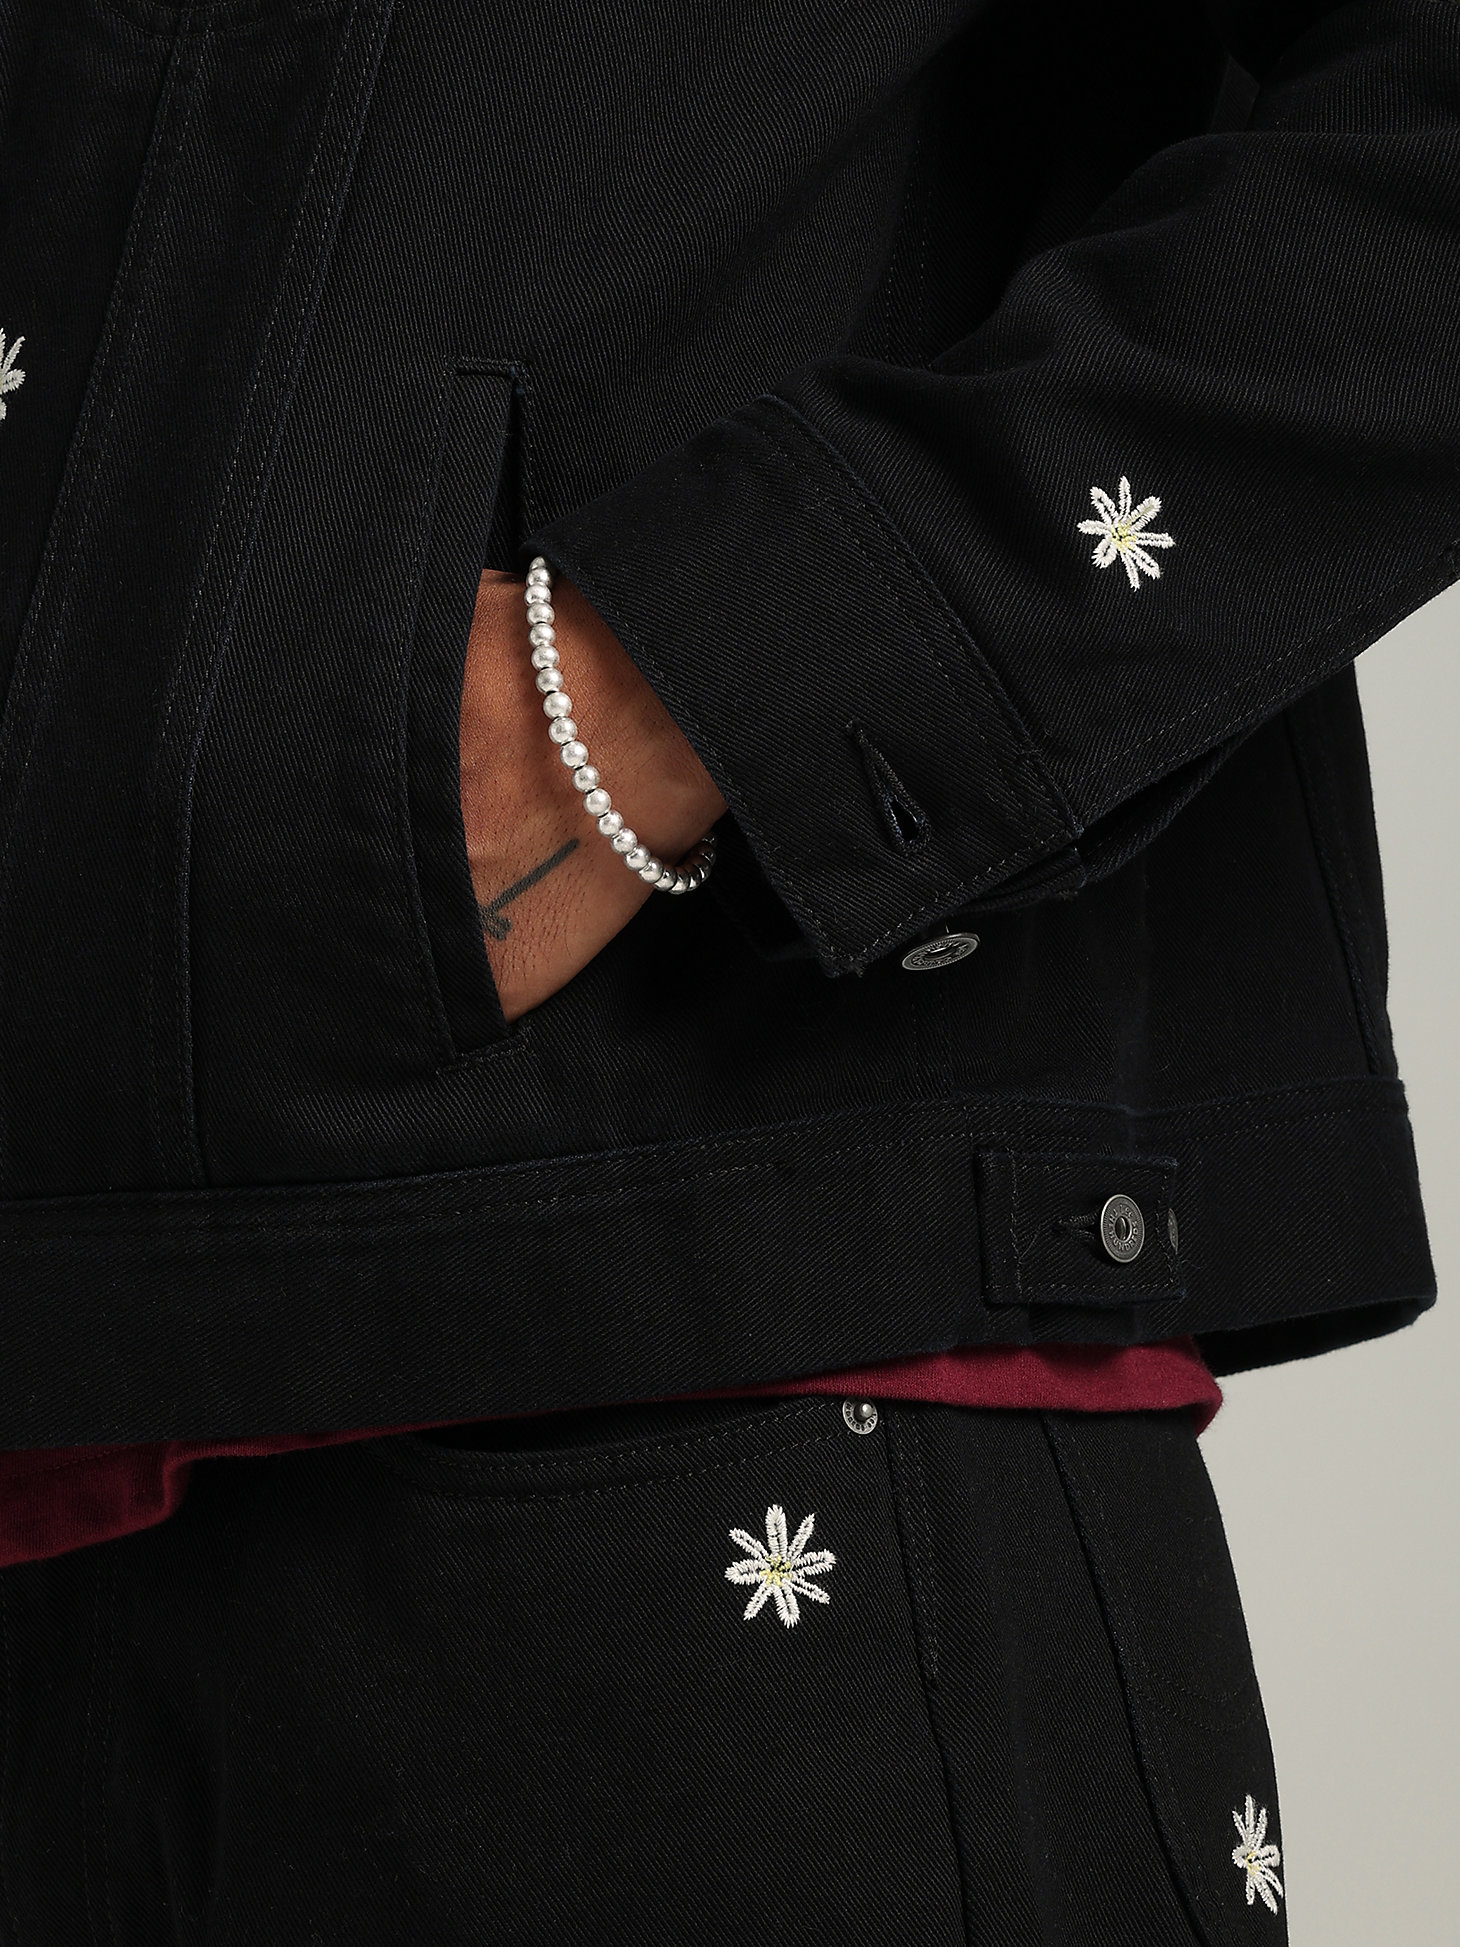 Lee® x The Hundreds® Flower Embroidered Oversized Jacket in Black alternative view 6